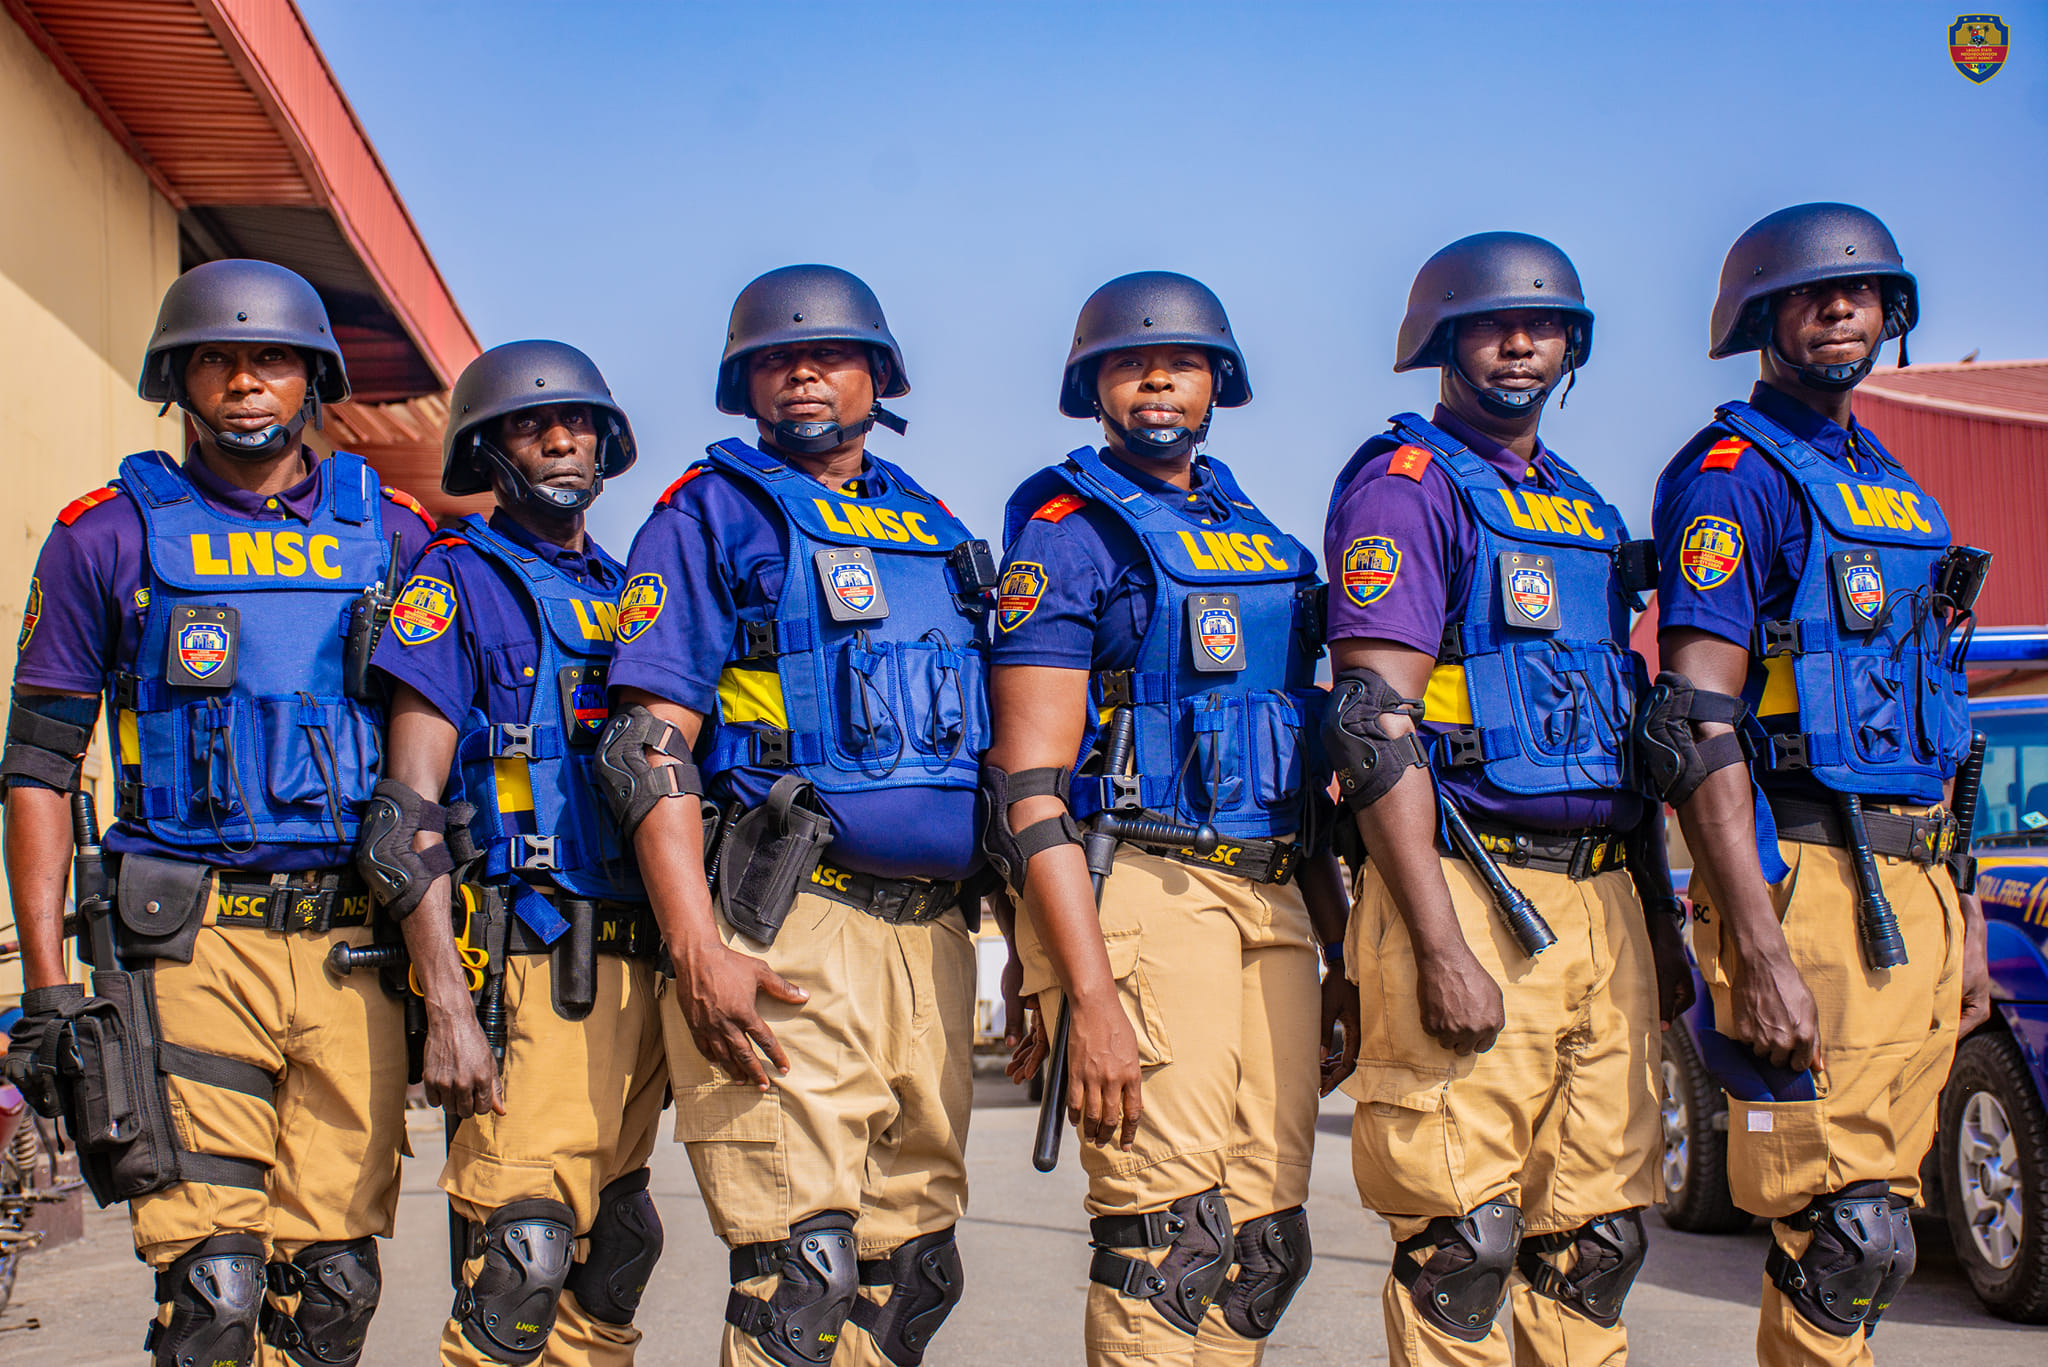 State Police, Lagos fully ready to go, says Attorney General